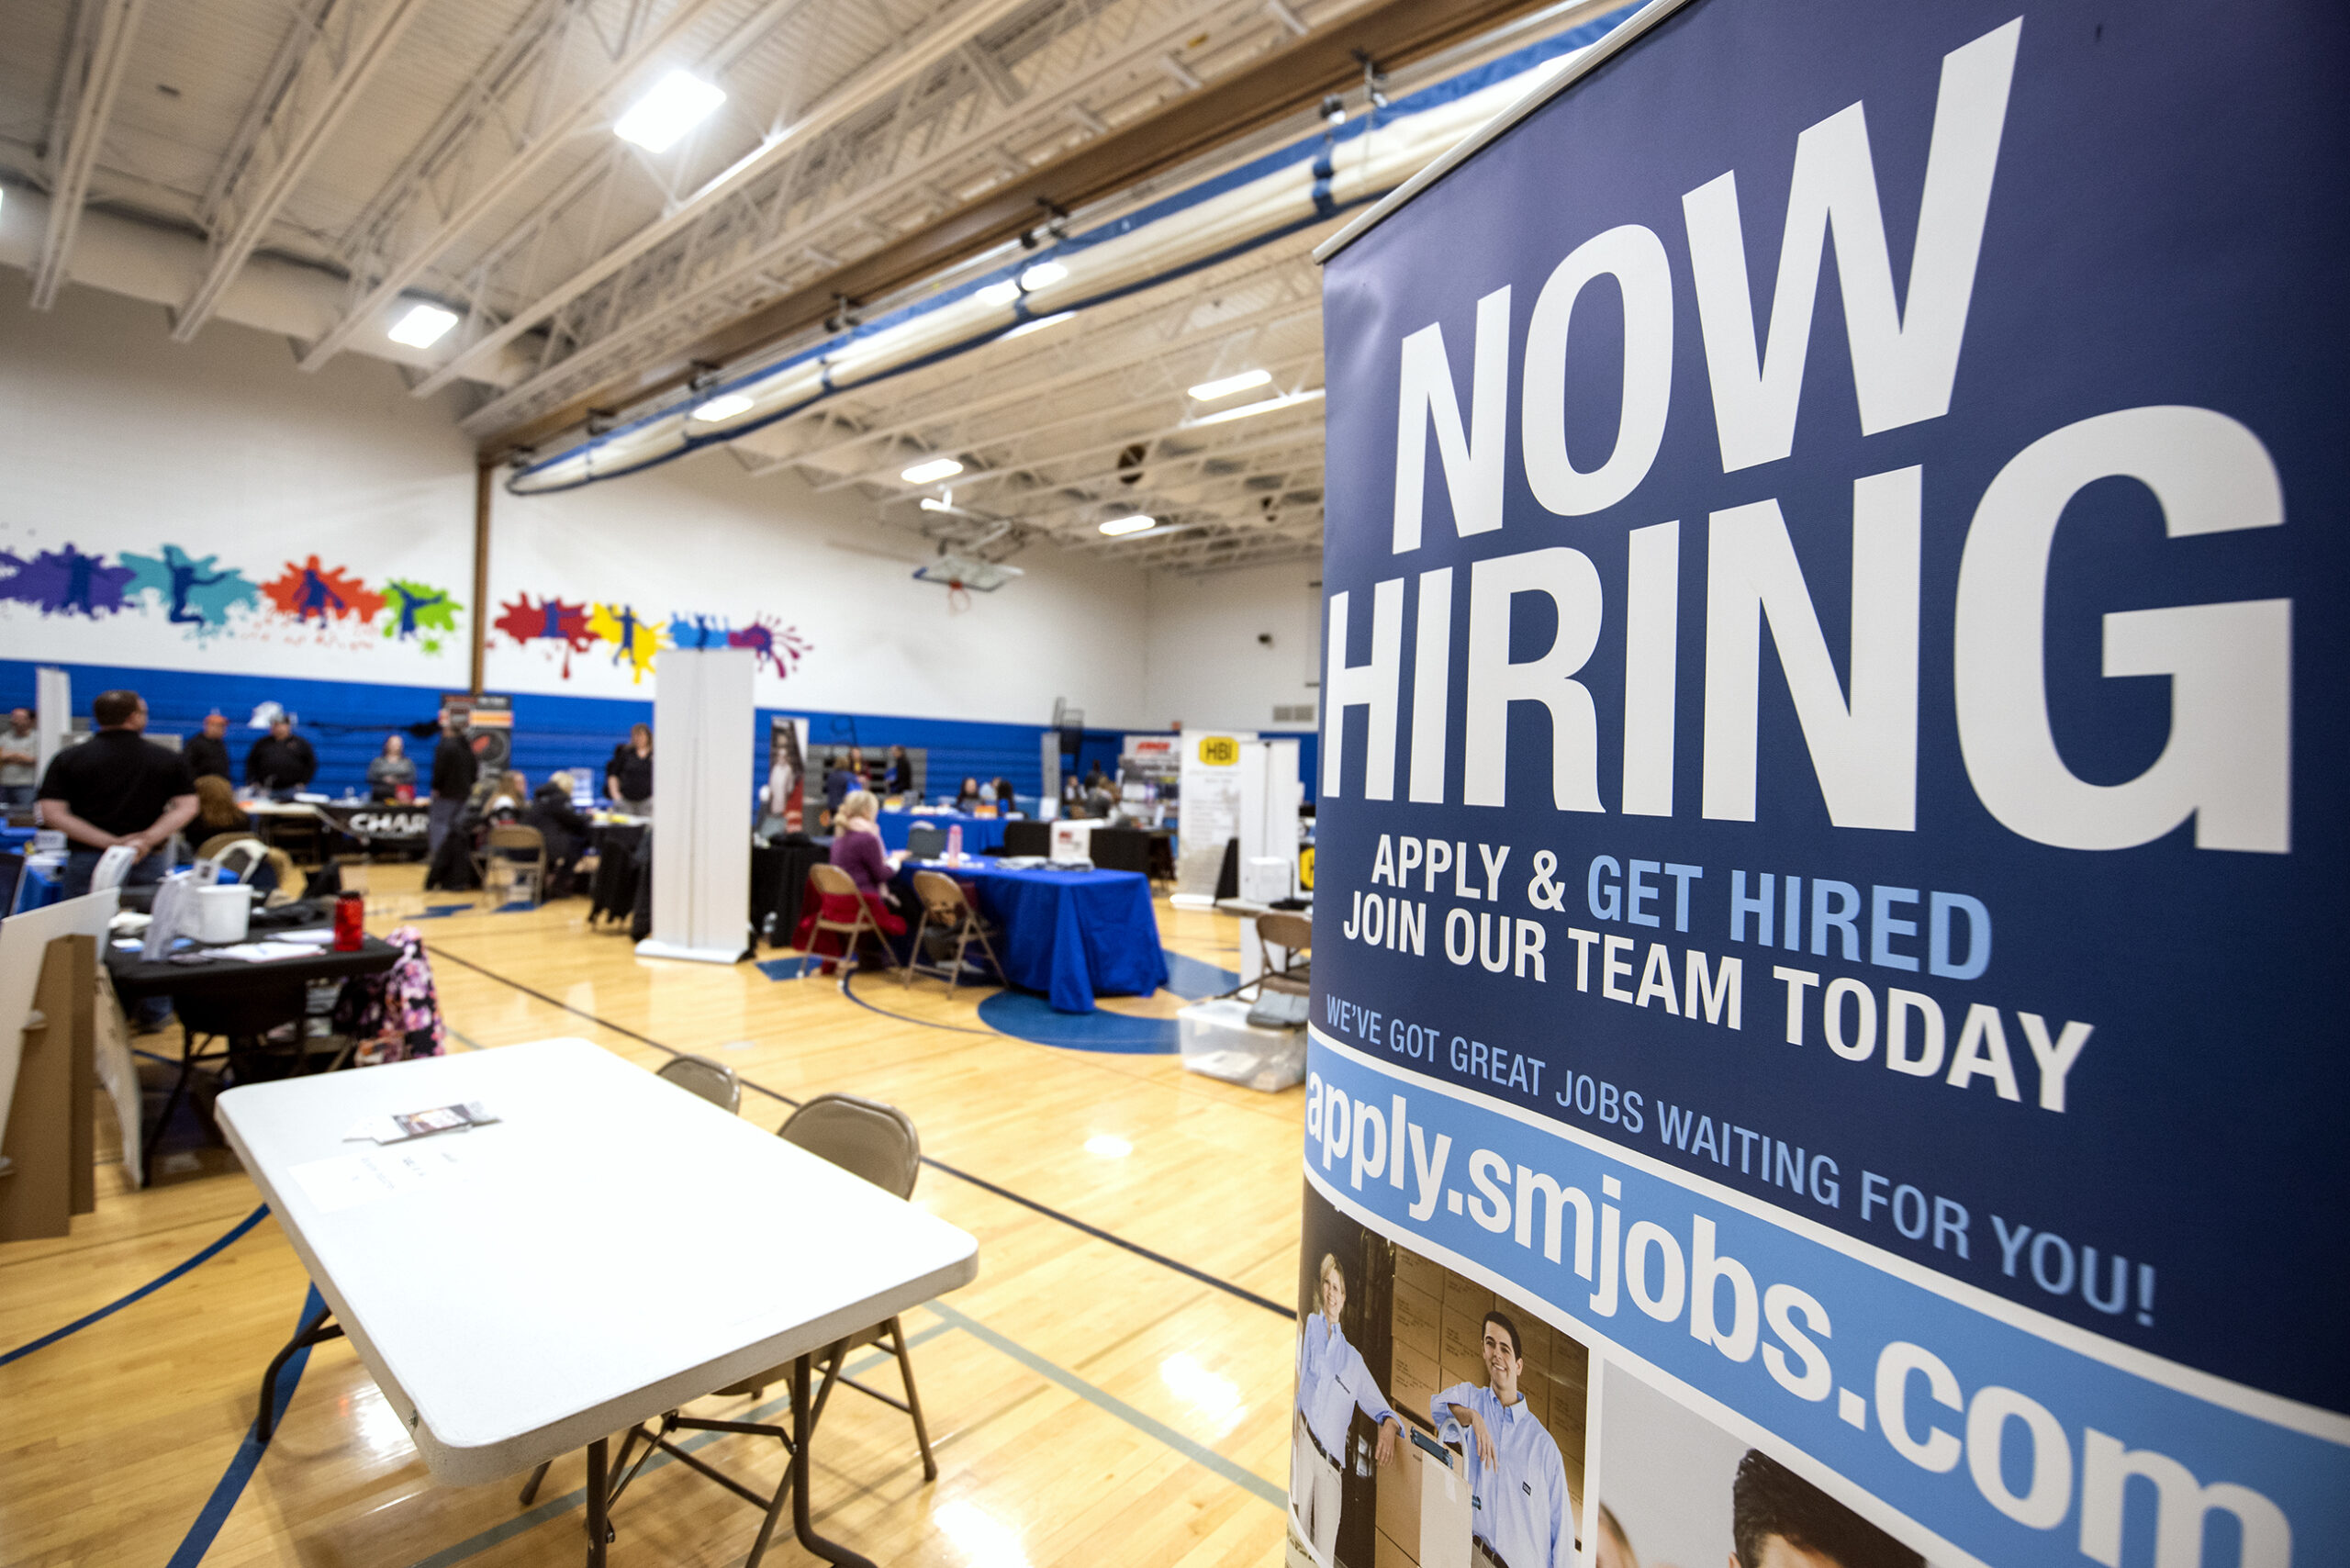 A blue banner at a career fair booth says "Now Hiring."